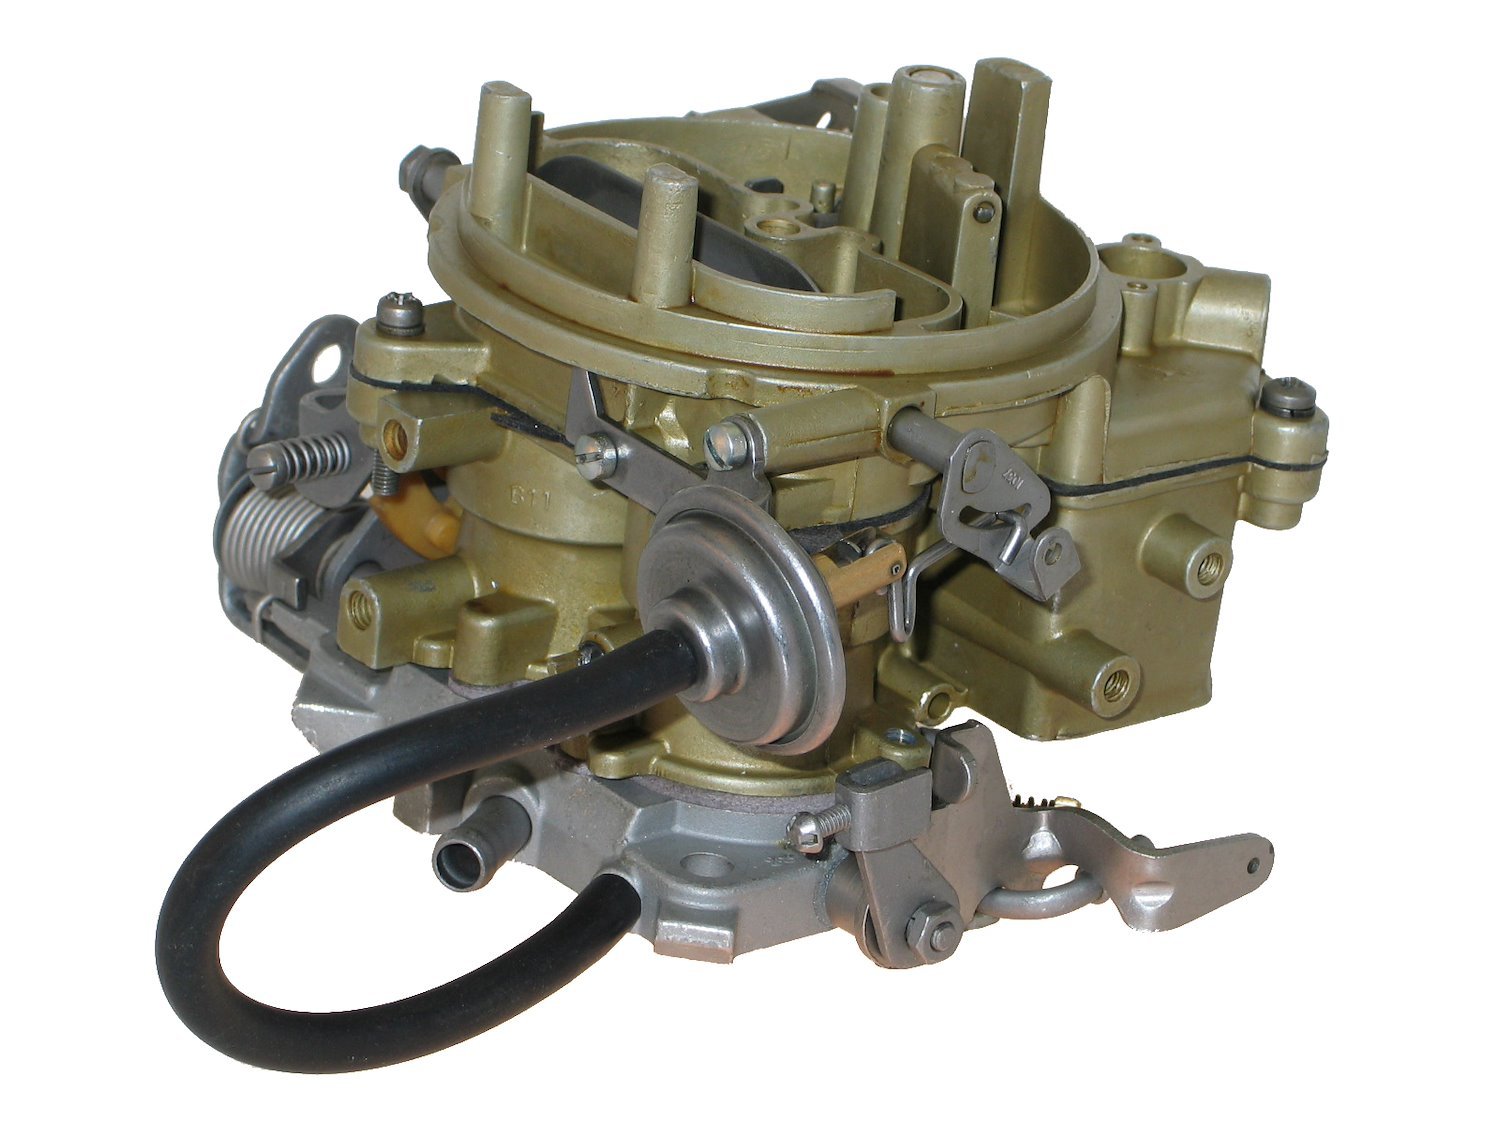 6-6264 Holley Remanufactured Carburetor, 2245, Heavy Duty-Style